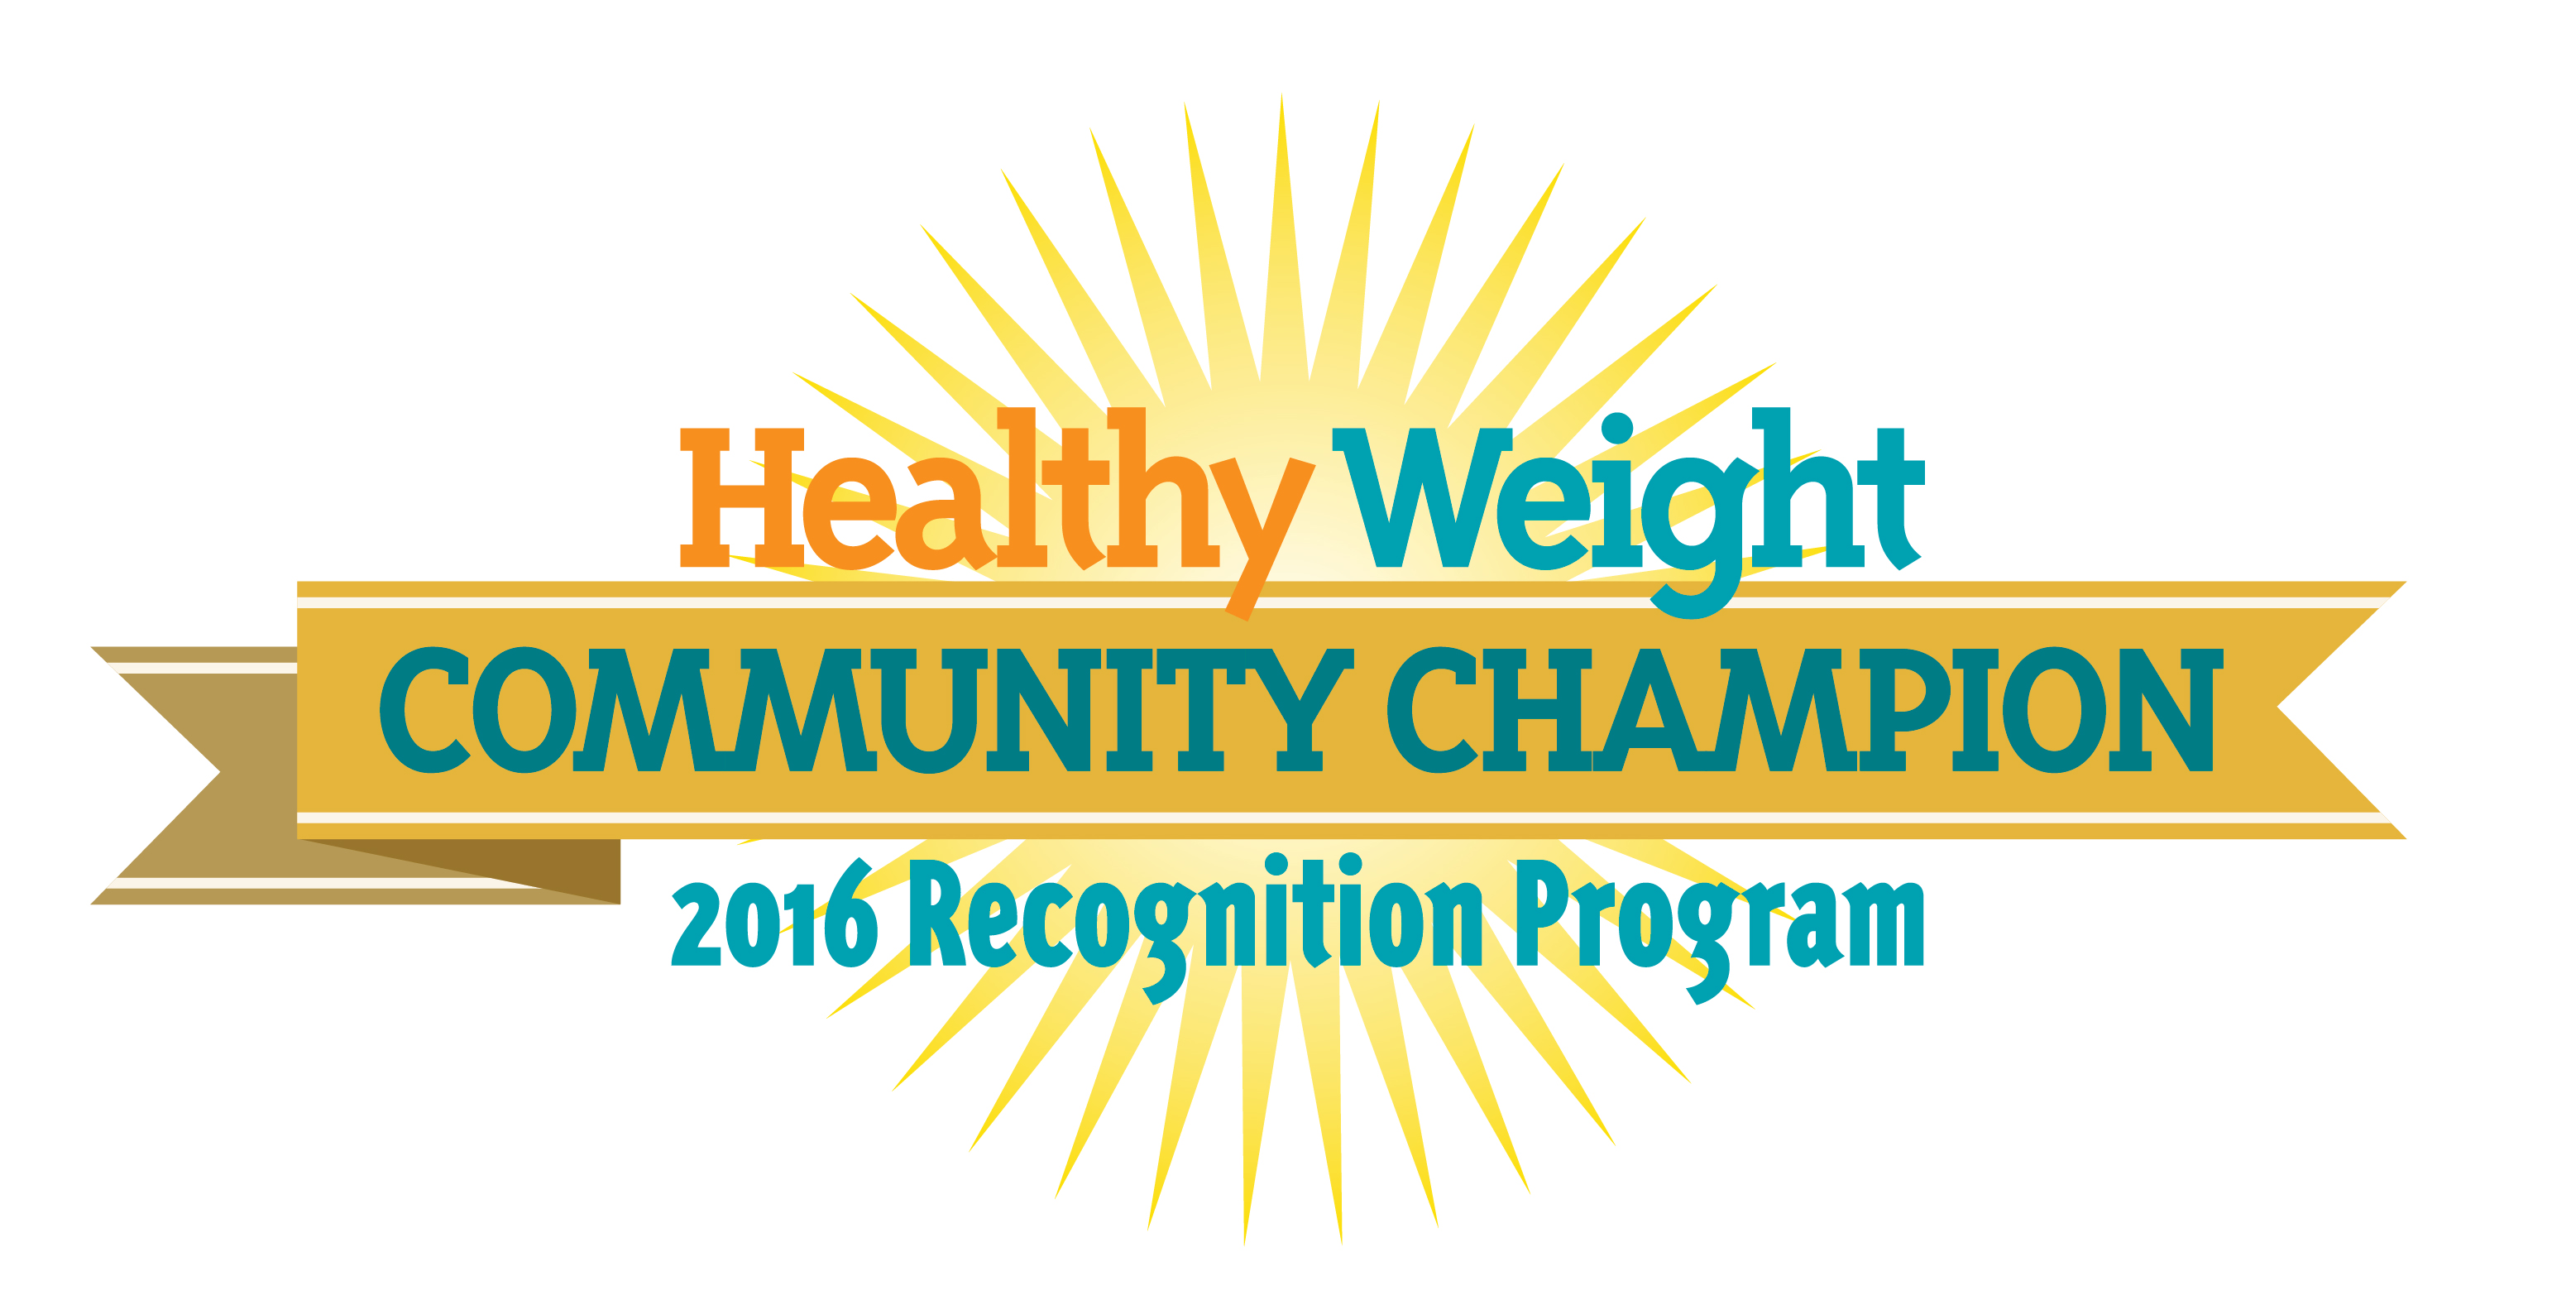 Healthy Weight Community Champion